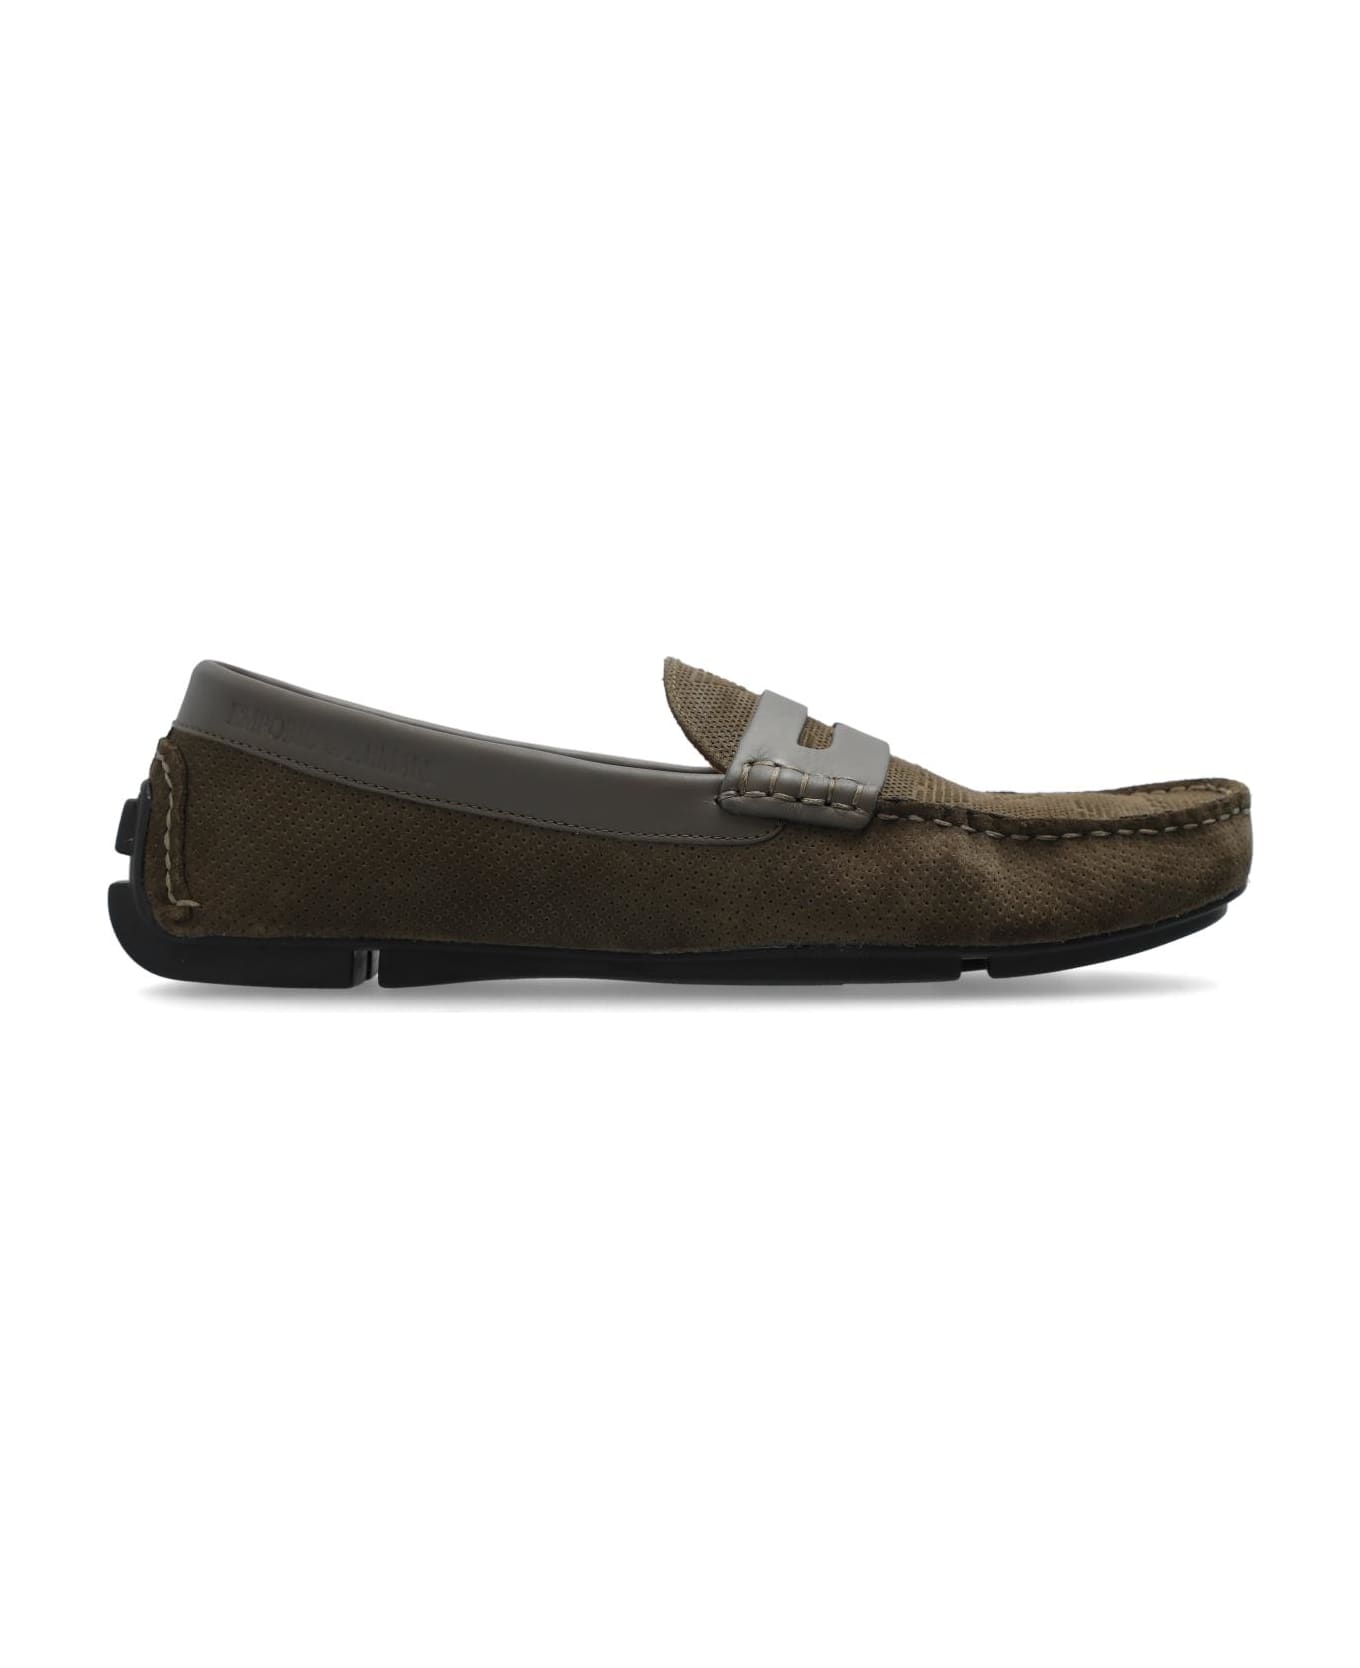 Emporio Armani Leather Loafers - Brown